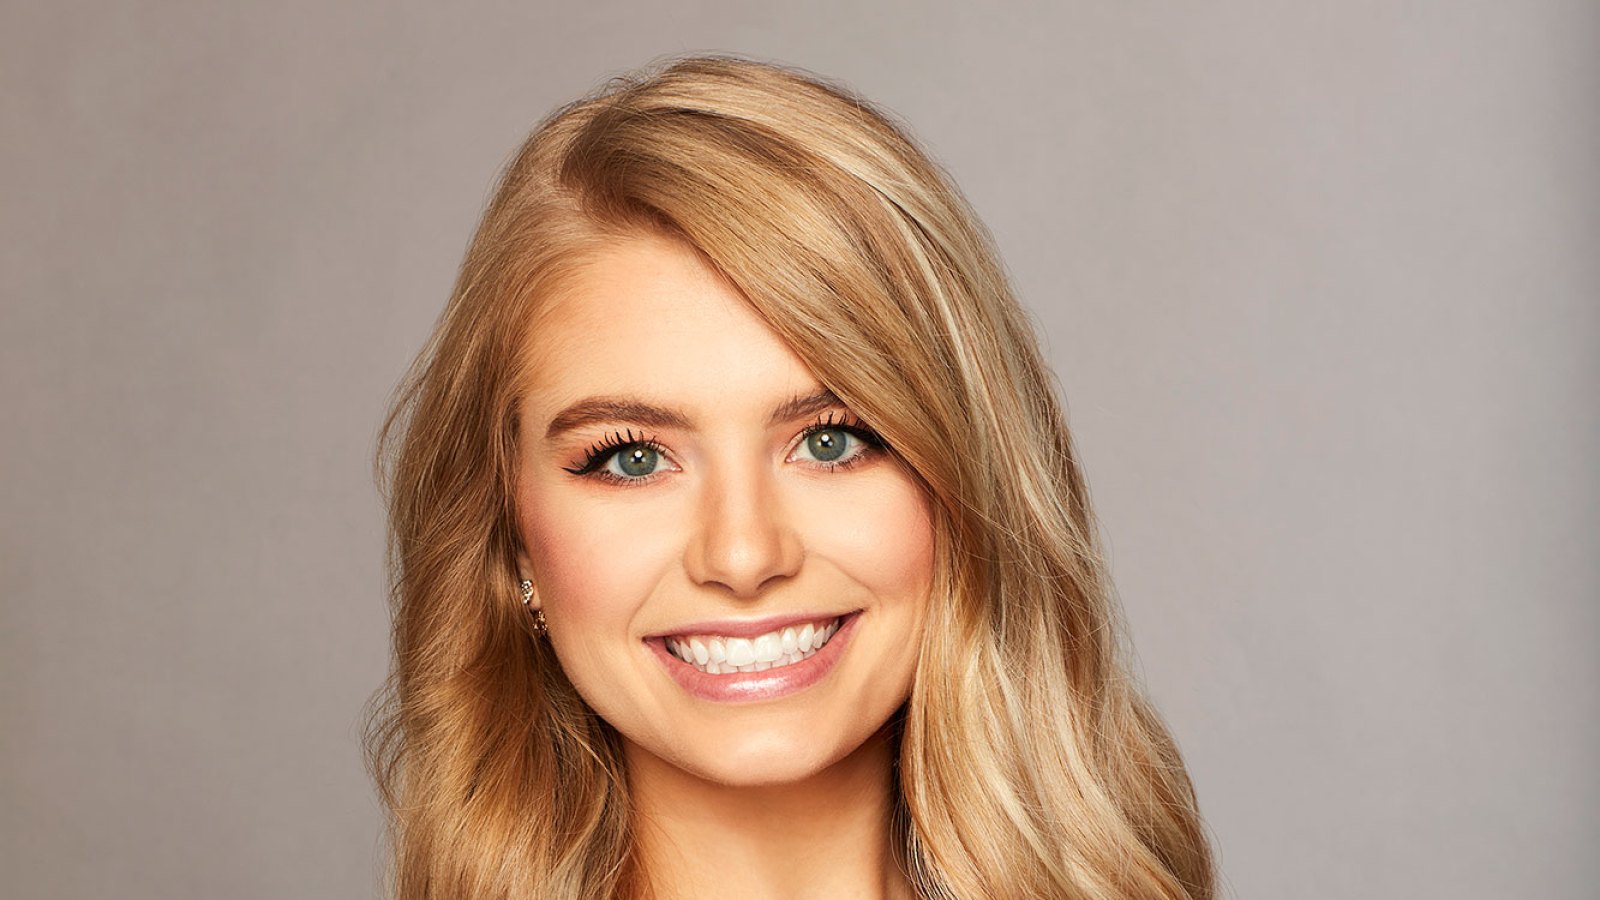 Bachelor’s Demi Burnett Reveals Haters Tell Her She Will ‘End Up in Prison Like’ Her Mother